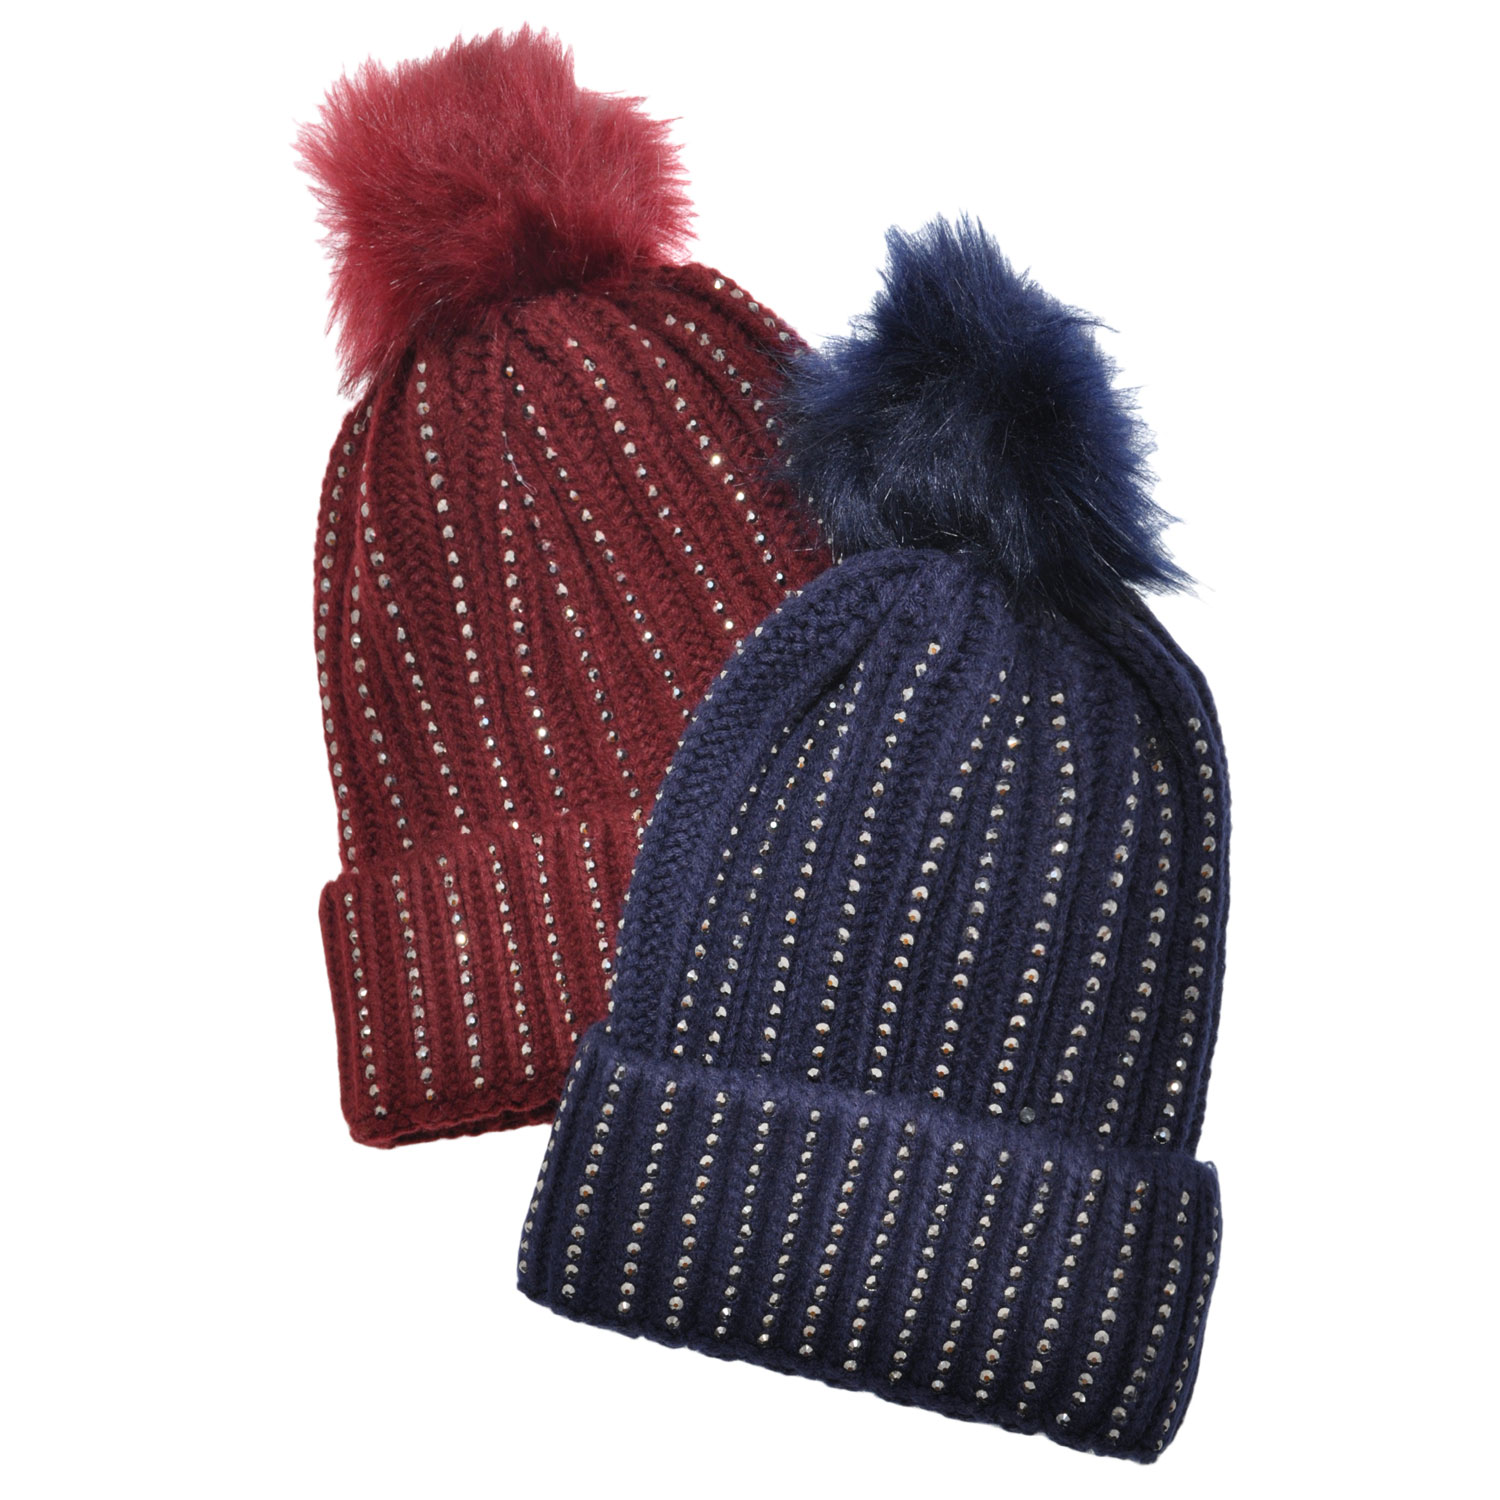 Pom-Pom Knit Beanies With Rhinestone Accent Design 2-Pack